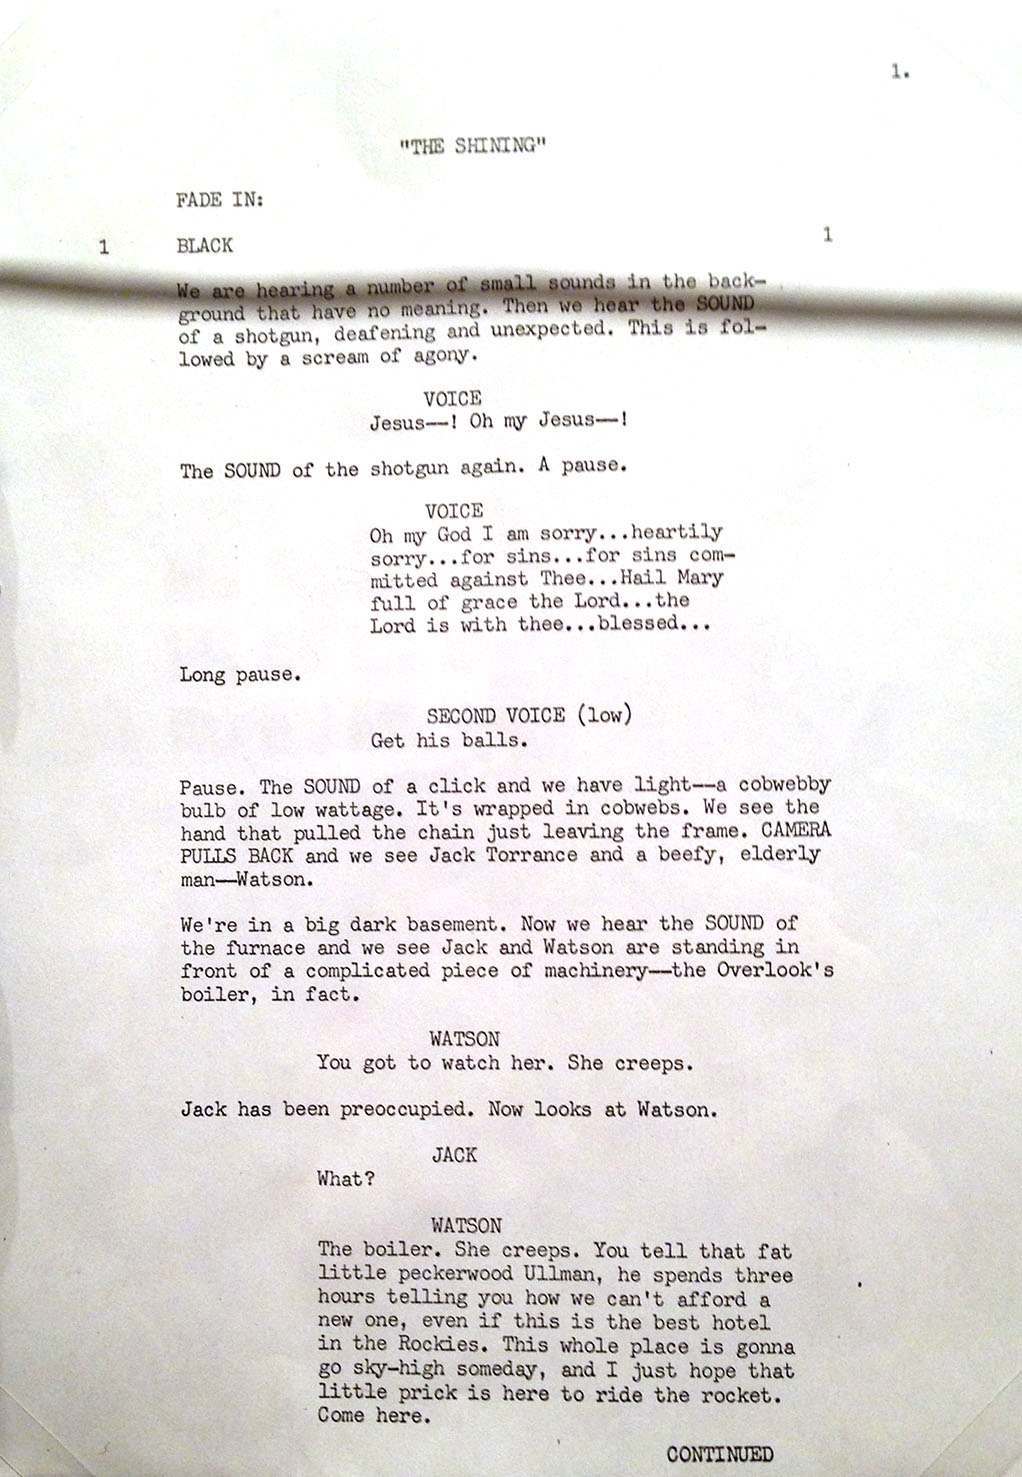 King's screenplay Page 1